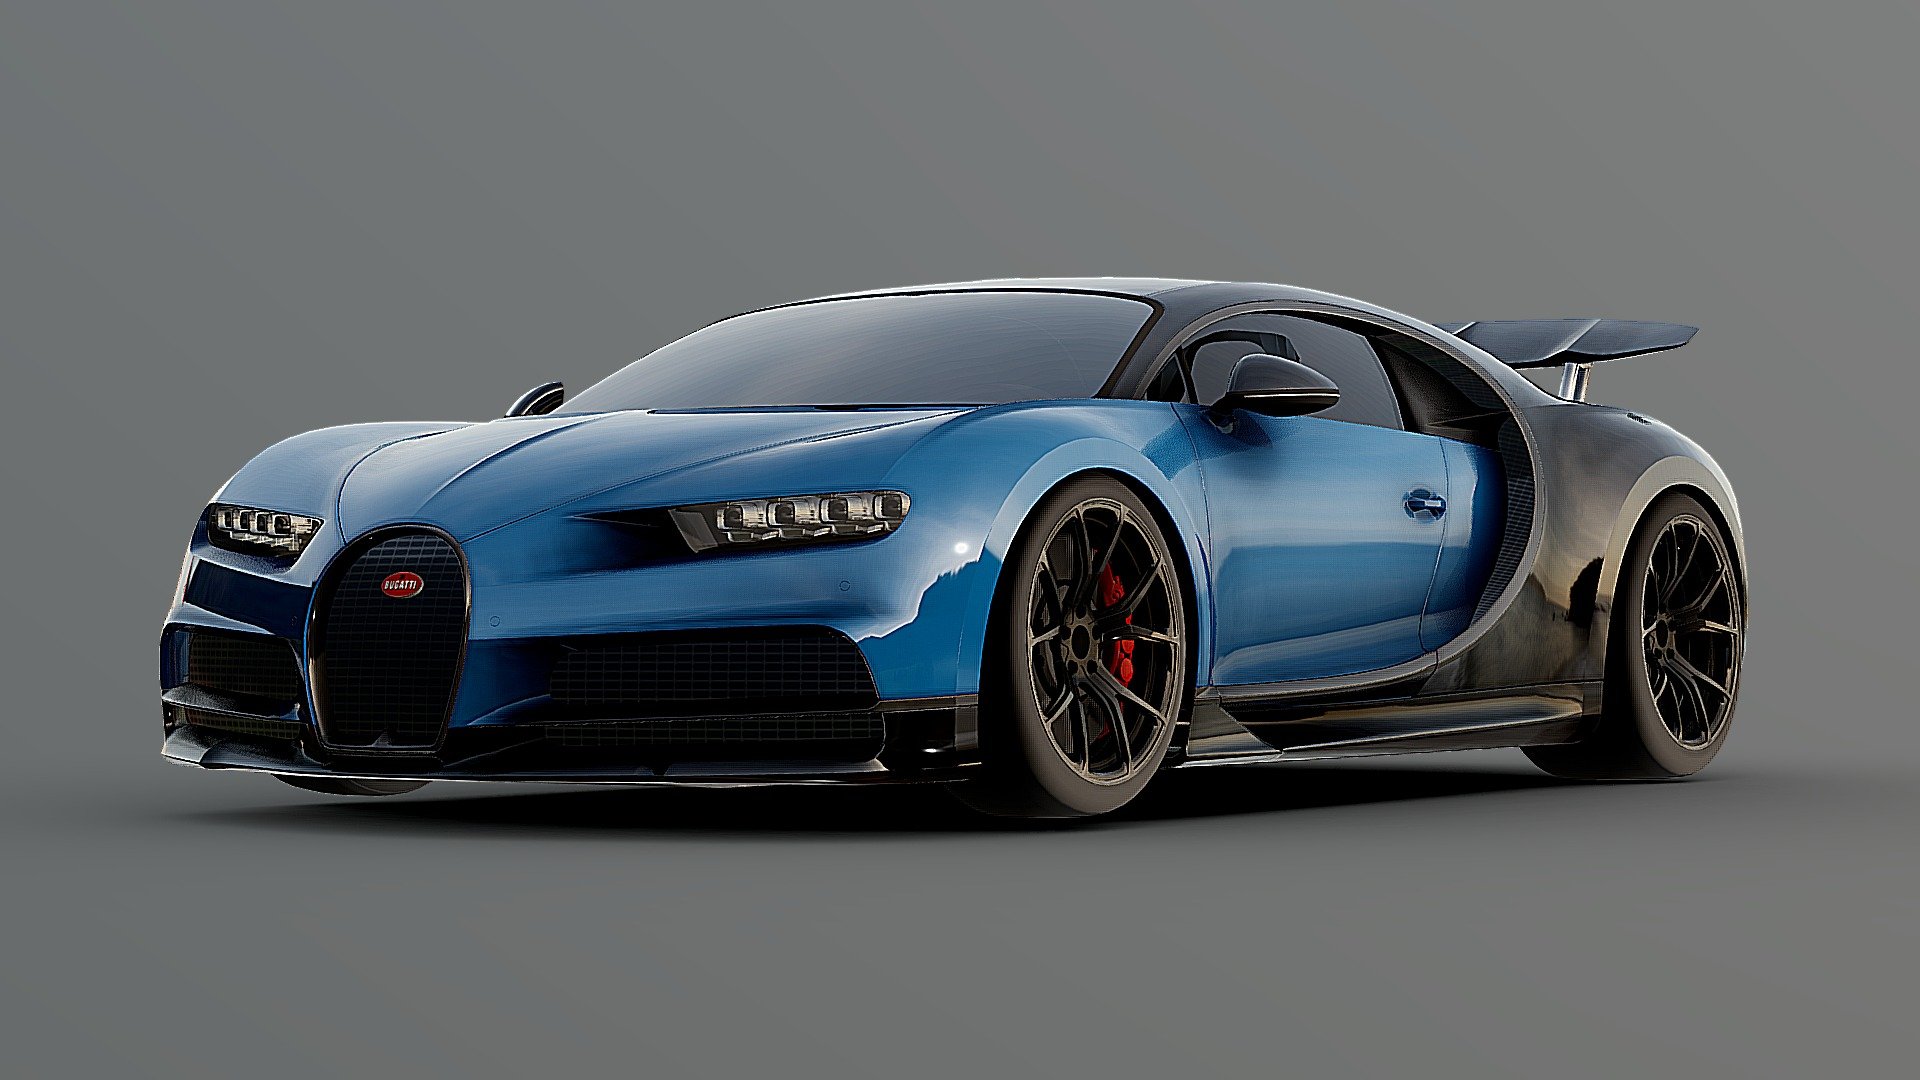 The Bugatti Chiron is a mid-engine two-seater sports car designed and developed in Germany by Bugatti Engineering GmbH and manufactured in Molsheim, France, by French automobile manufacturer Bugatti Automobiles S.A.S. The successor to the Bugatti Veyron, the Chiron was first shown at the Geneva Motor Show on 1 March 2016 3d model